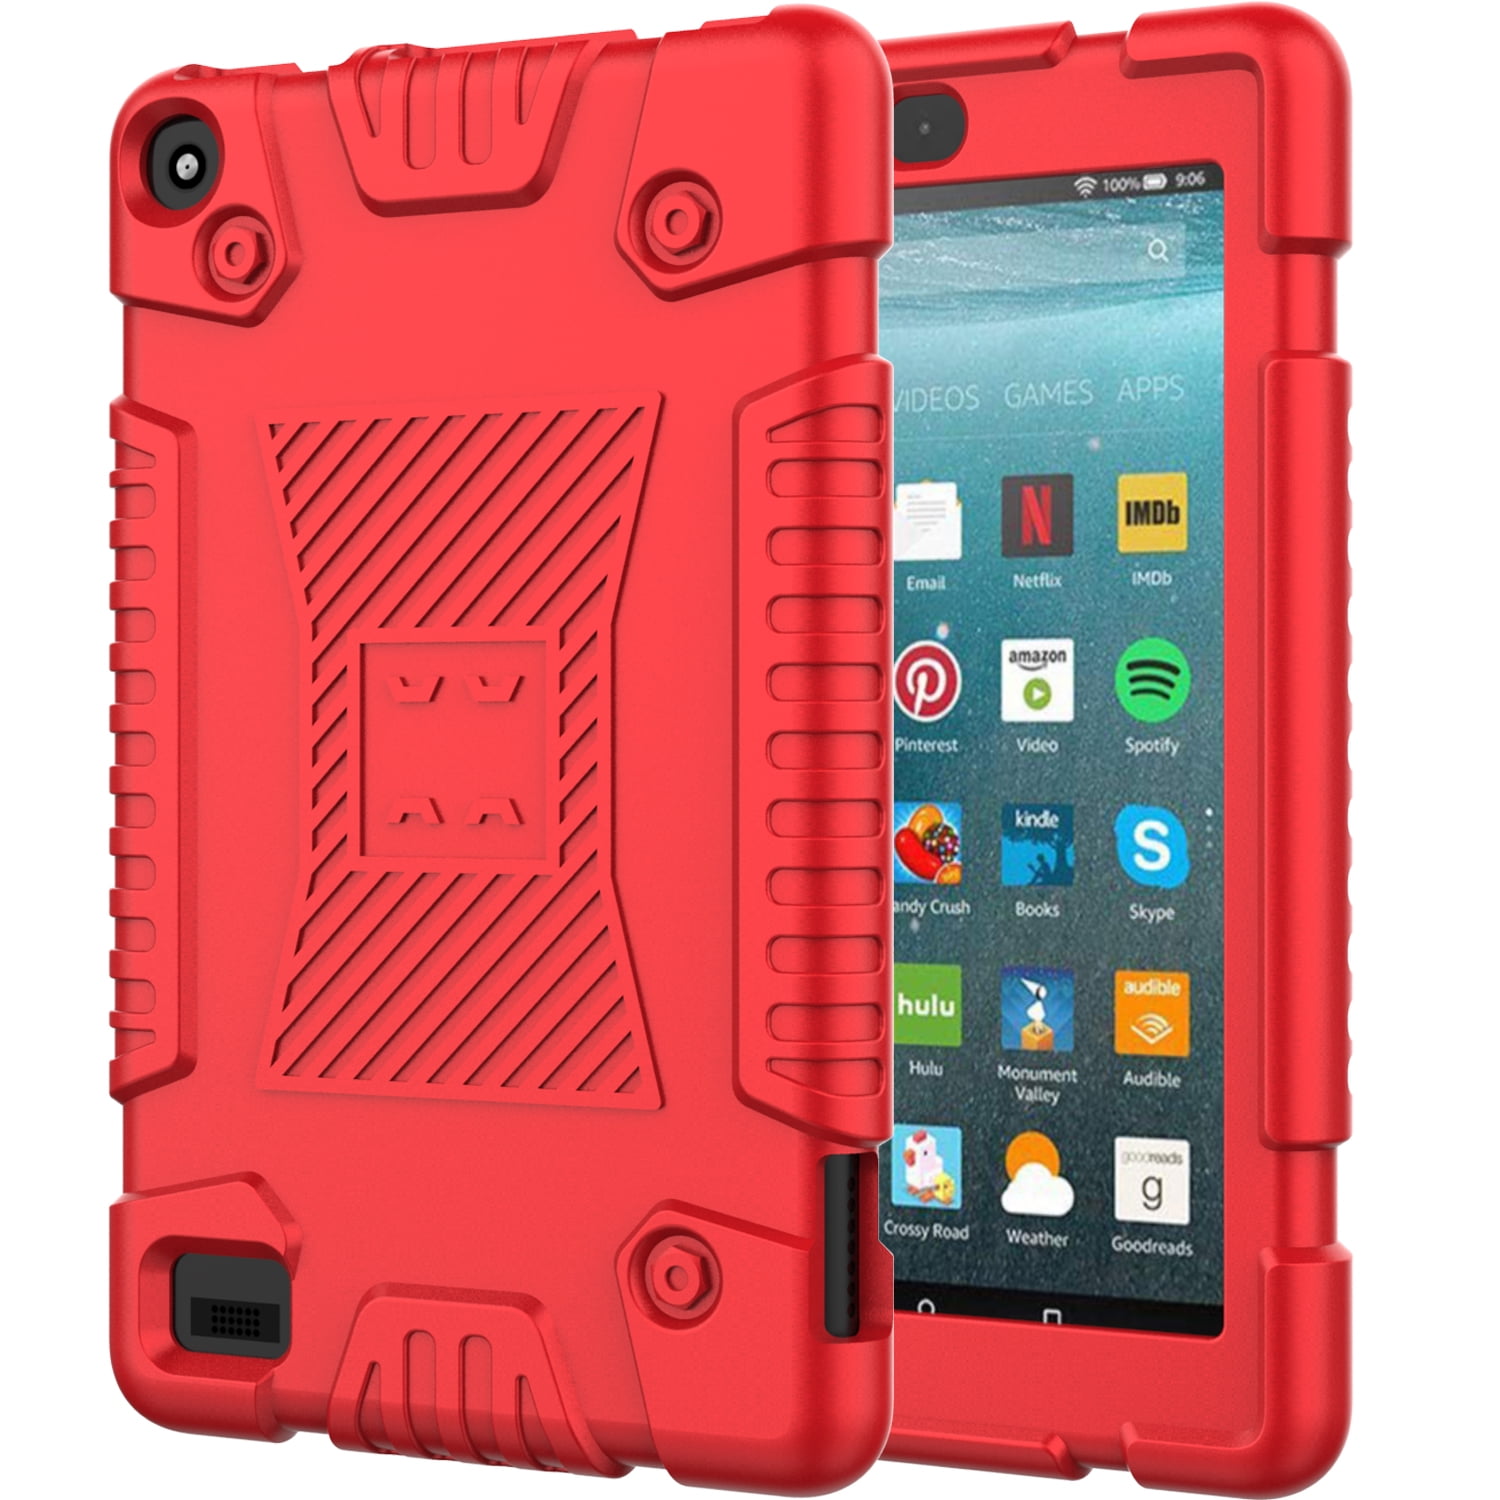 JKRED Heavy Duty Shock-Proof Case Cover for  Fire 7 9th Generation 2019 Released Tablet,Full Protection for Camera with Kickstand,Hand Strap Design,Armor Tough for Kids 